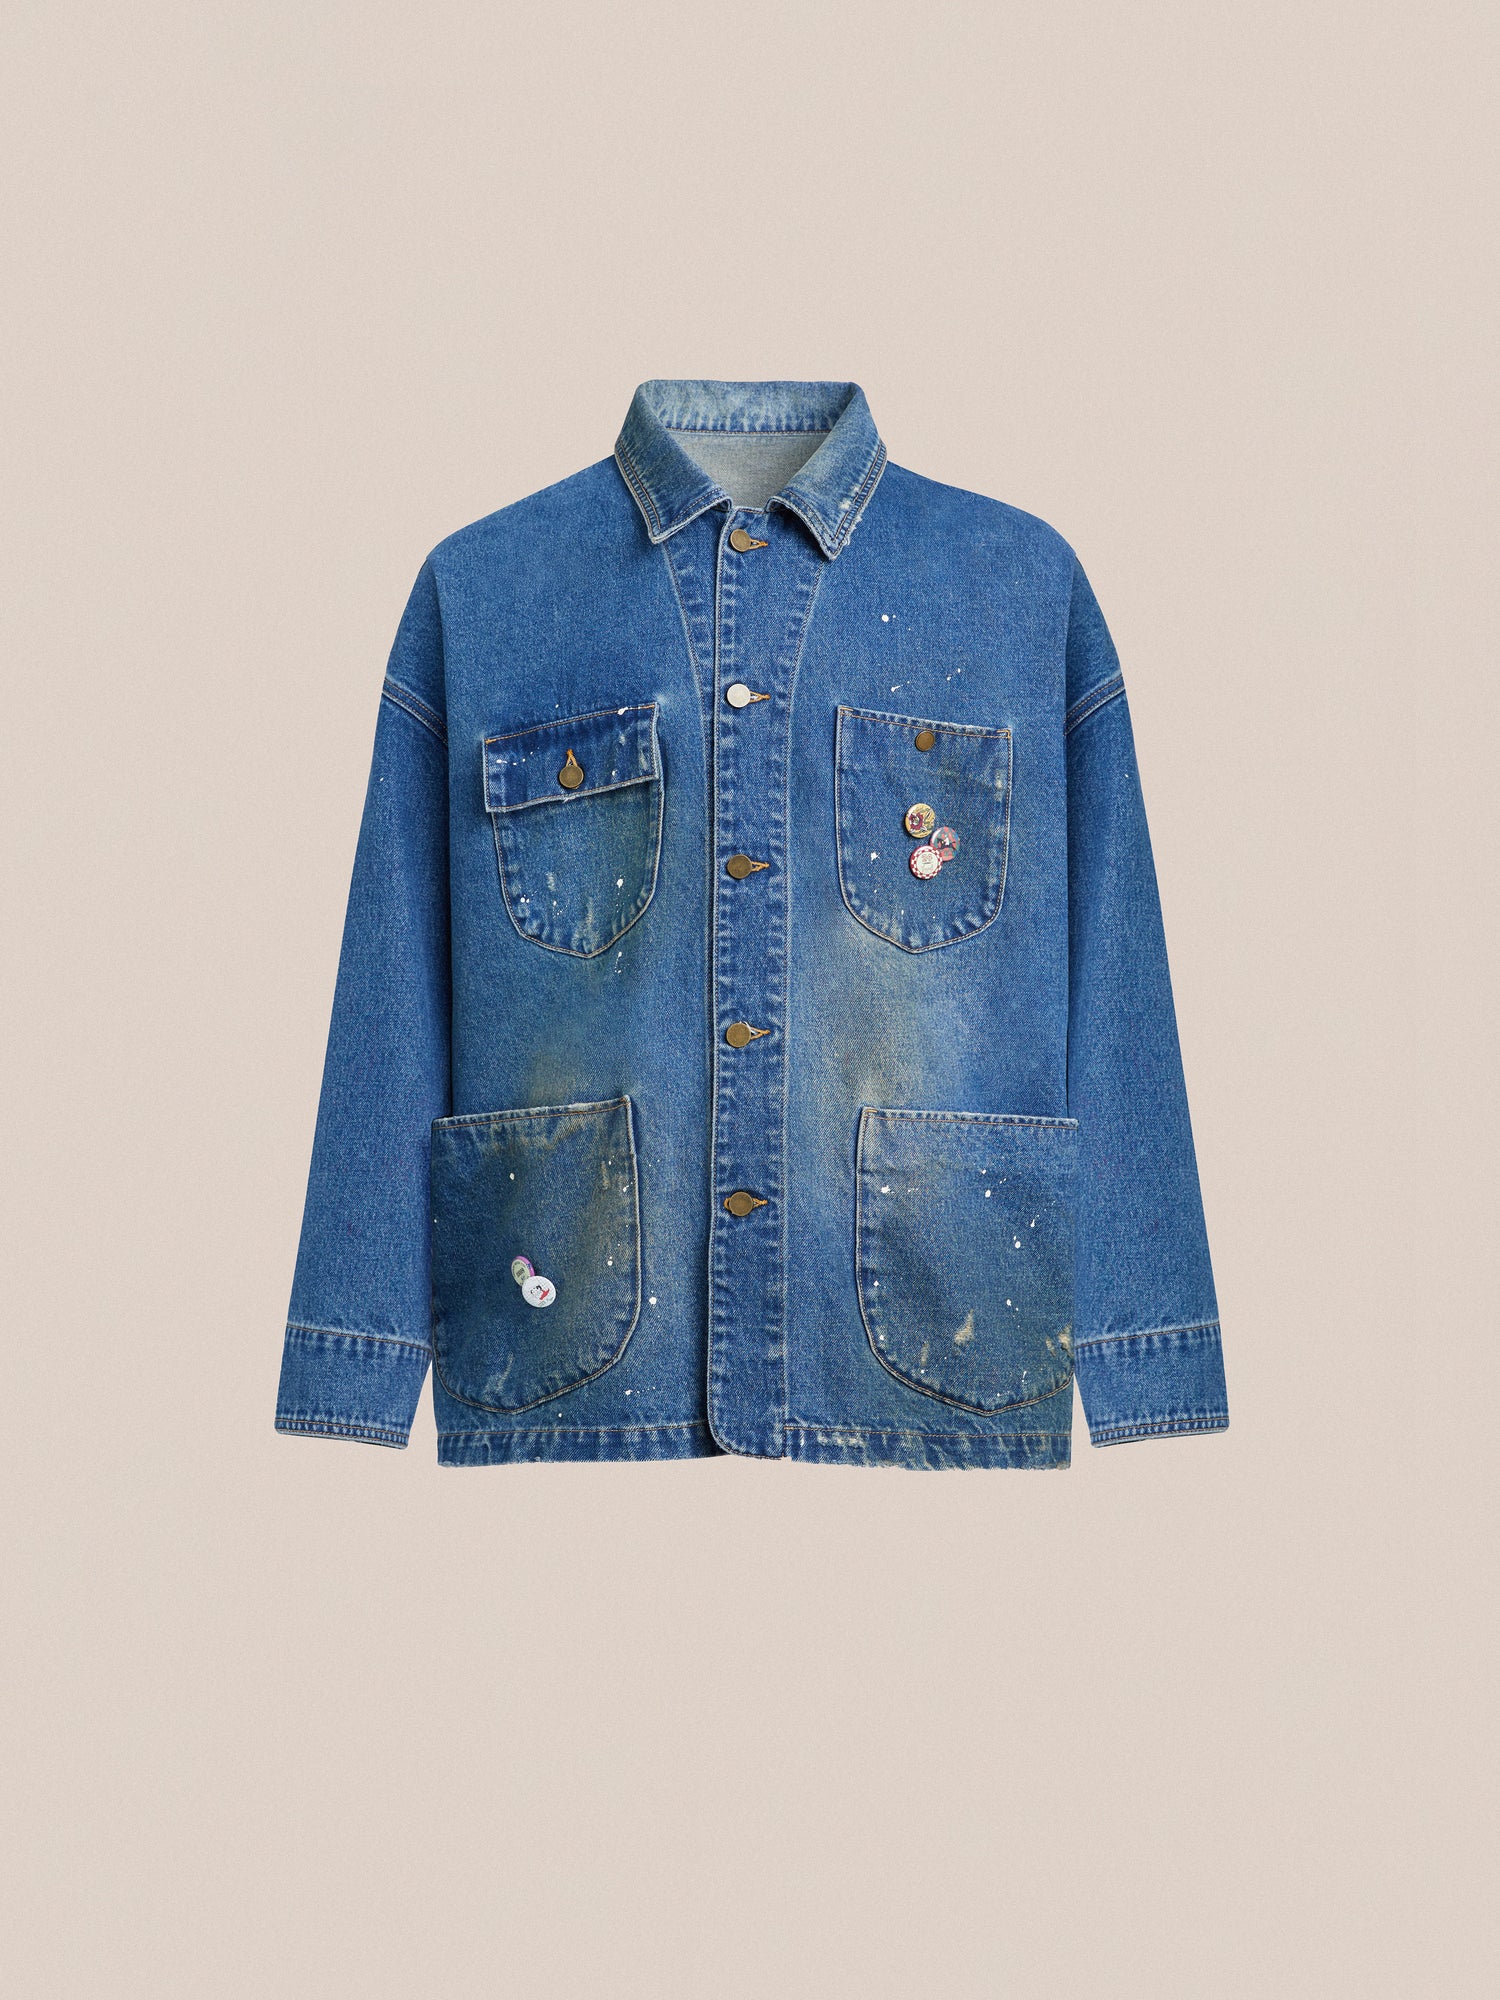 A blue Kavir denim painter jacket with patches on the sleeves and pockets by Found.